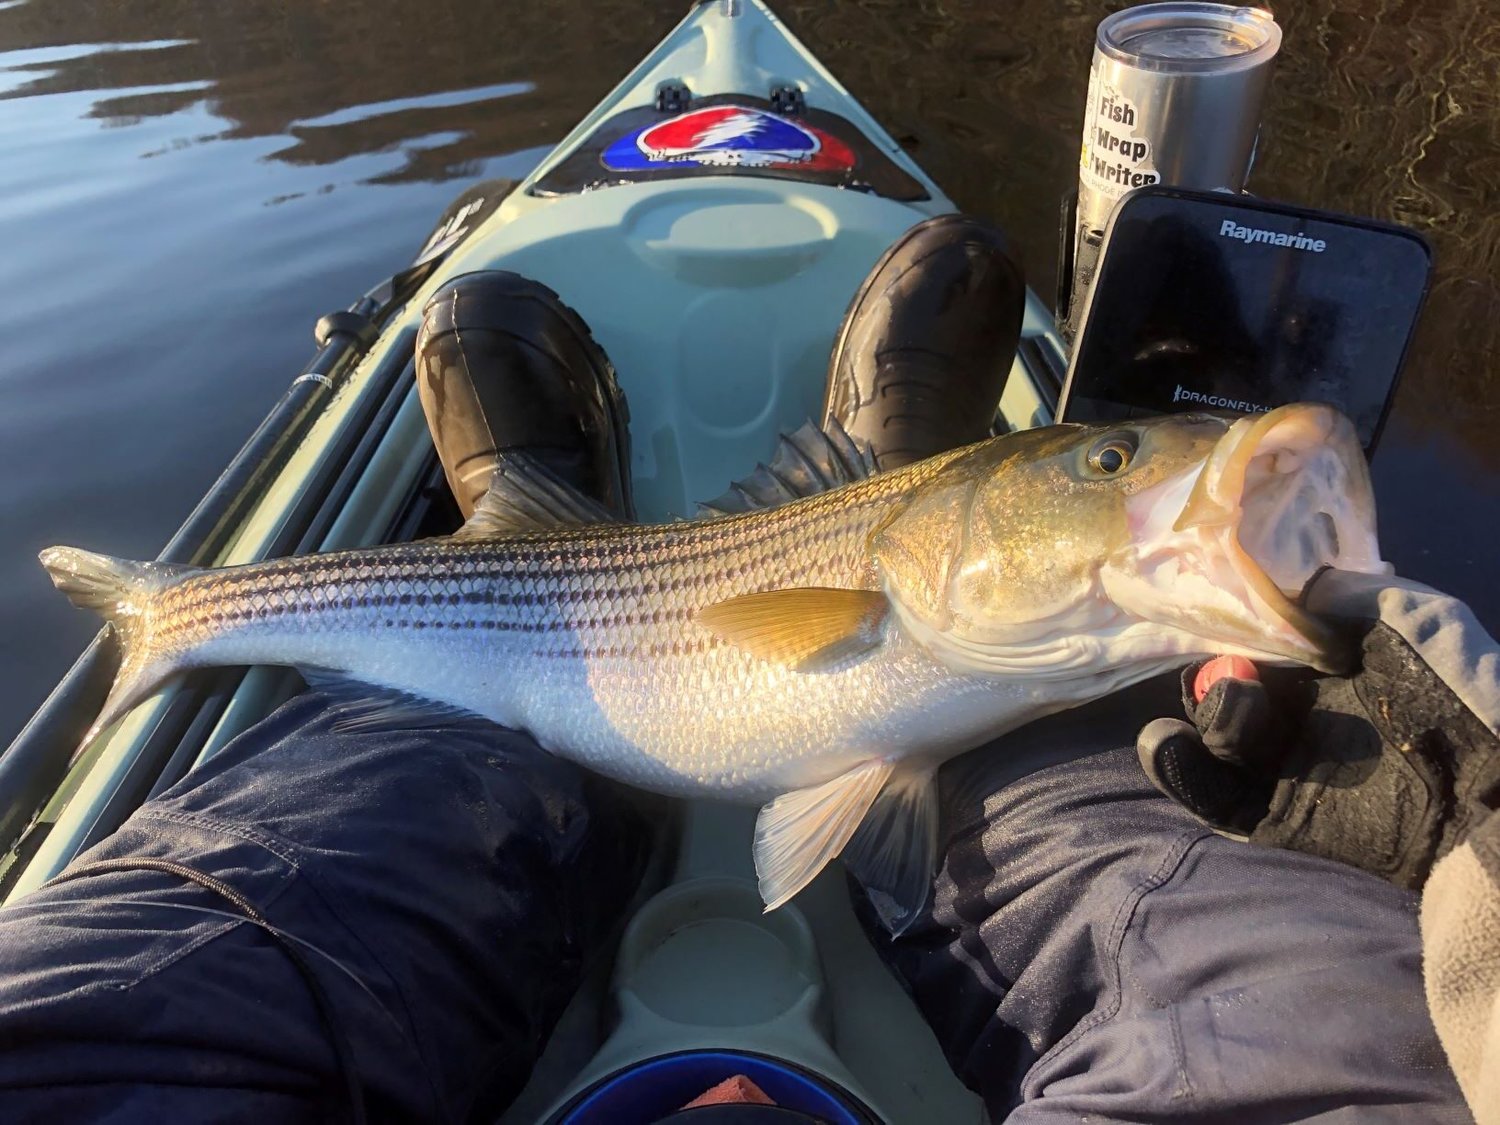 Spring stripers from a kayak: learn about kayak fishing basics and more from Todd Corayer, expert kayak fisherman and fishing writer, May 24 at a RI Saltwater Anglers Association online seminar.